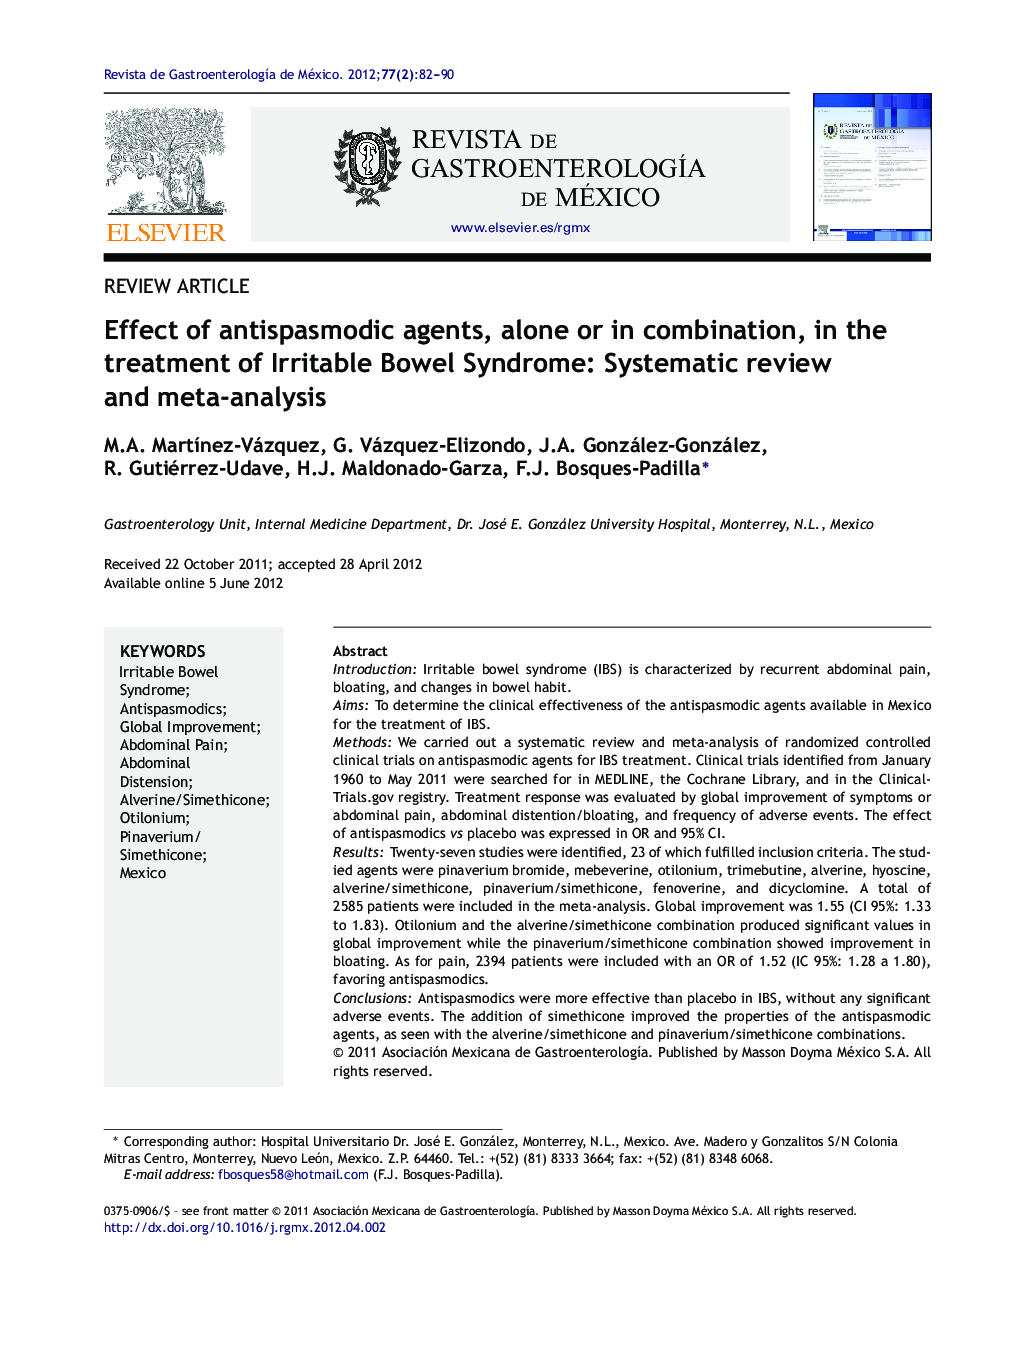 Effect of antispasmodic agents, alone or in combination, in the treatment of Irritable Bowel Syndrome: Systematic review and meta-analysis